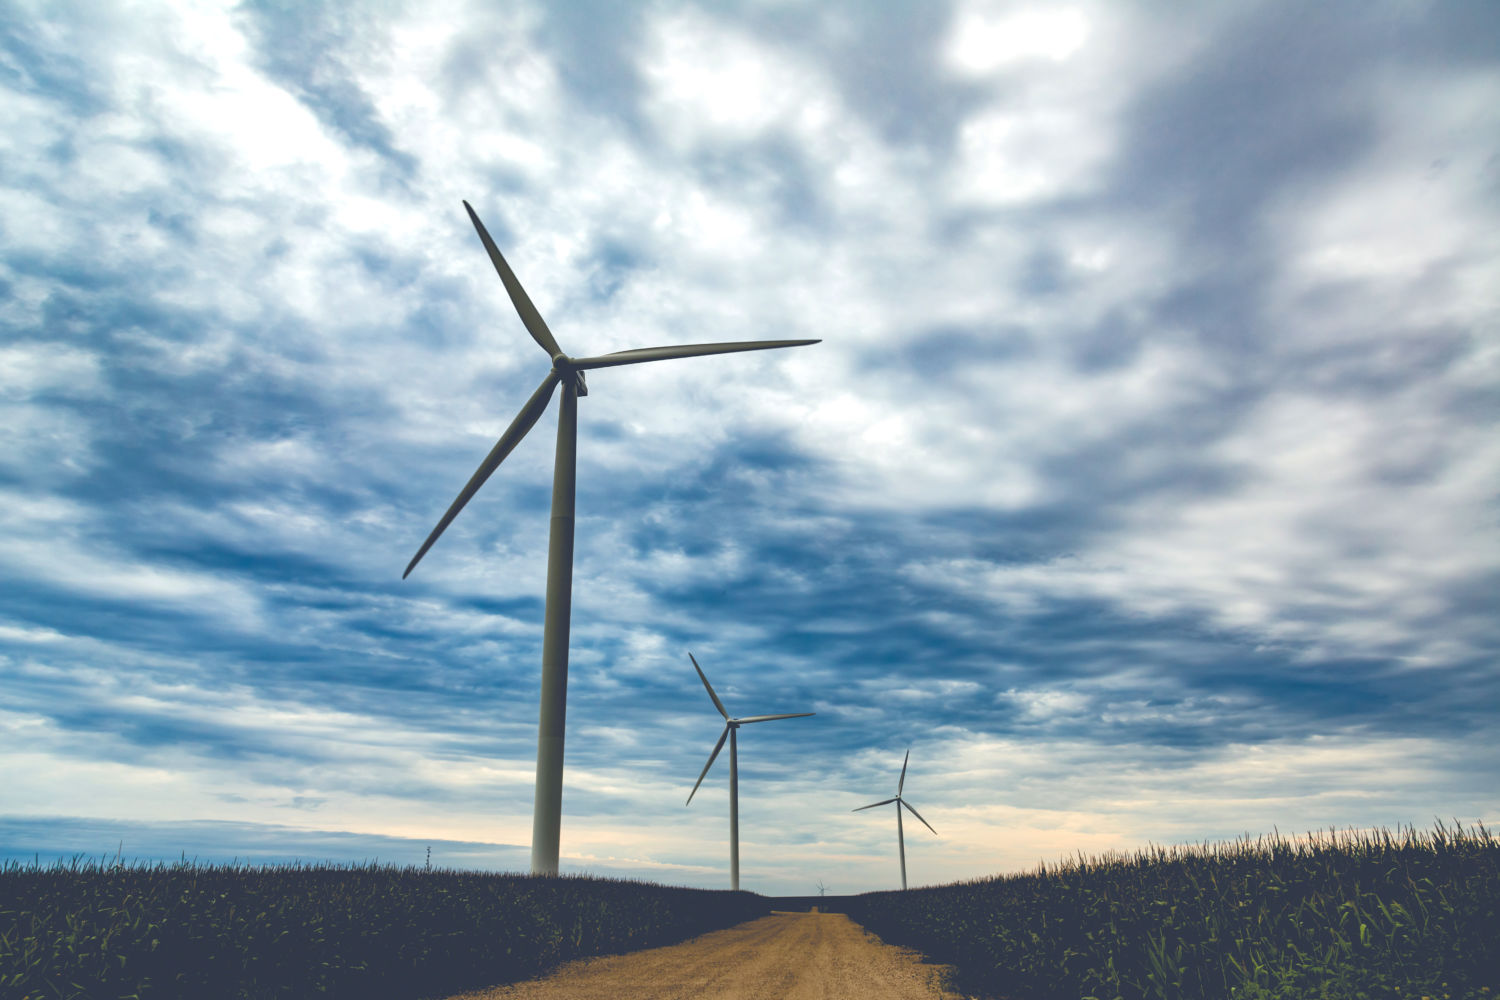 After a Shaky Start, Airborne Wind Energy Is Slowly Taking Off - Yale E360